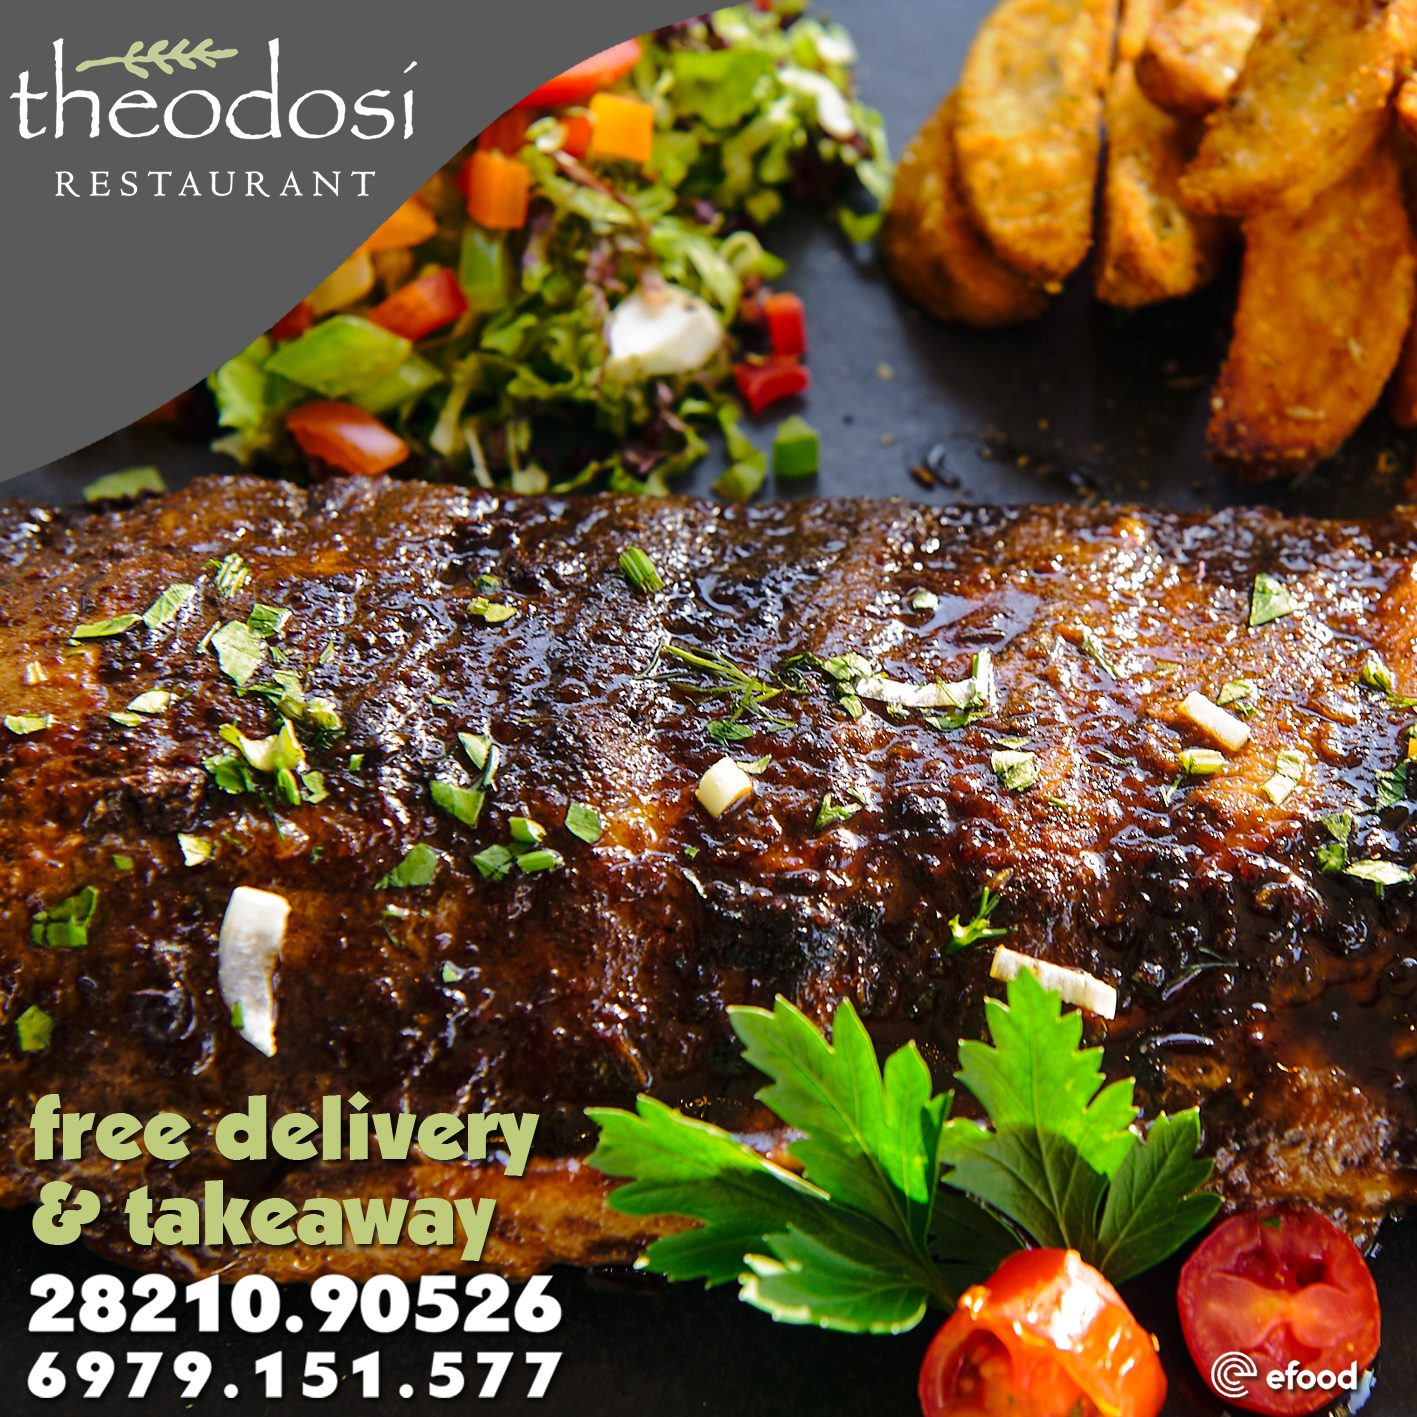 BBQ Ribs ....A must try dish at Theodosi restaurant!